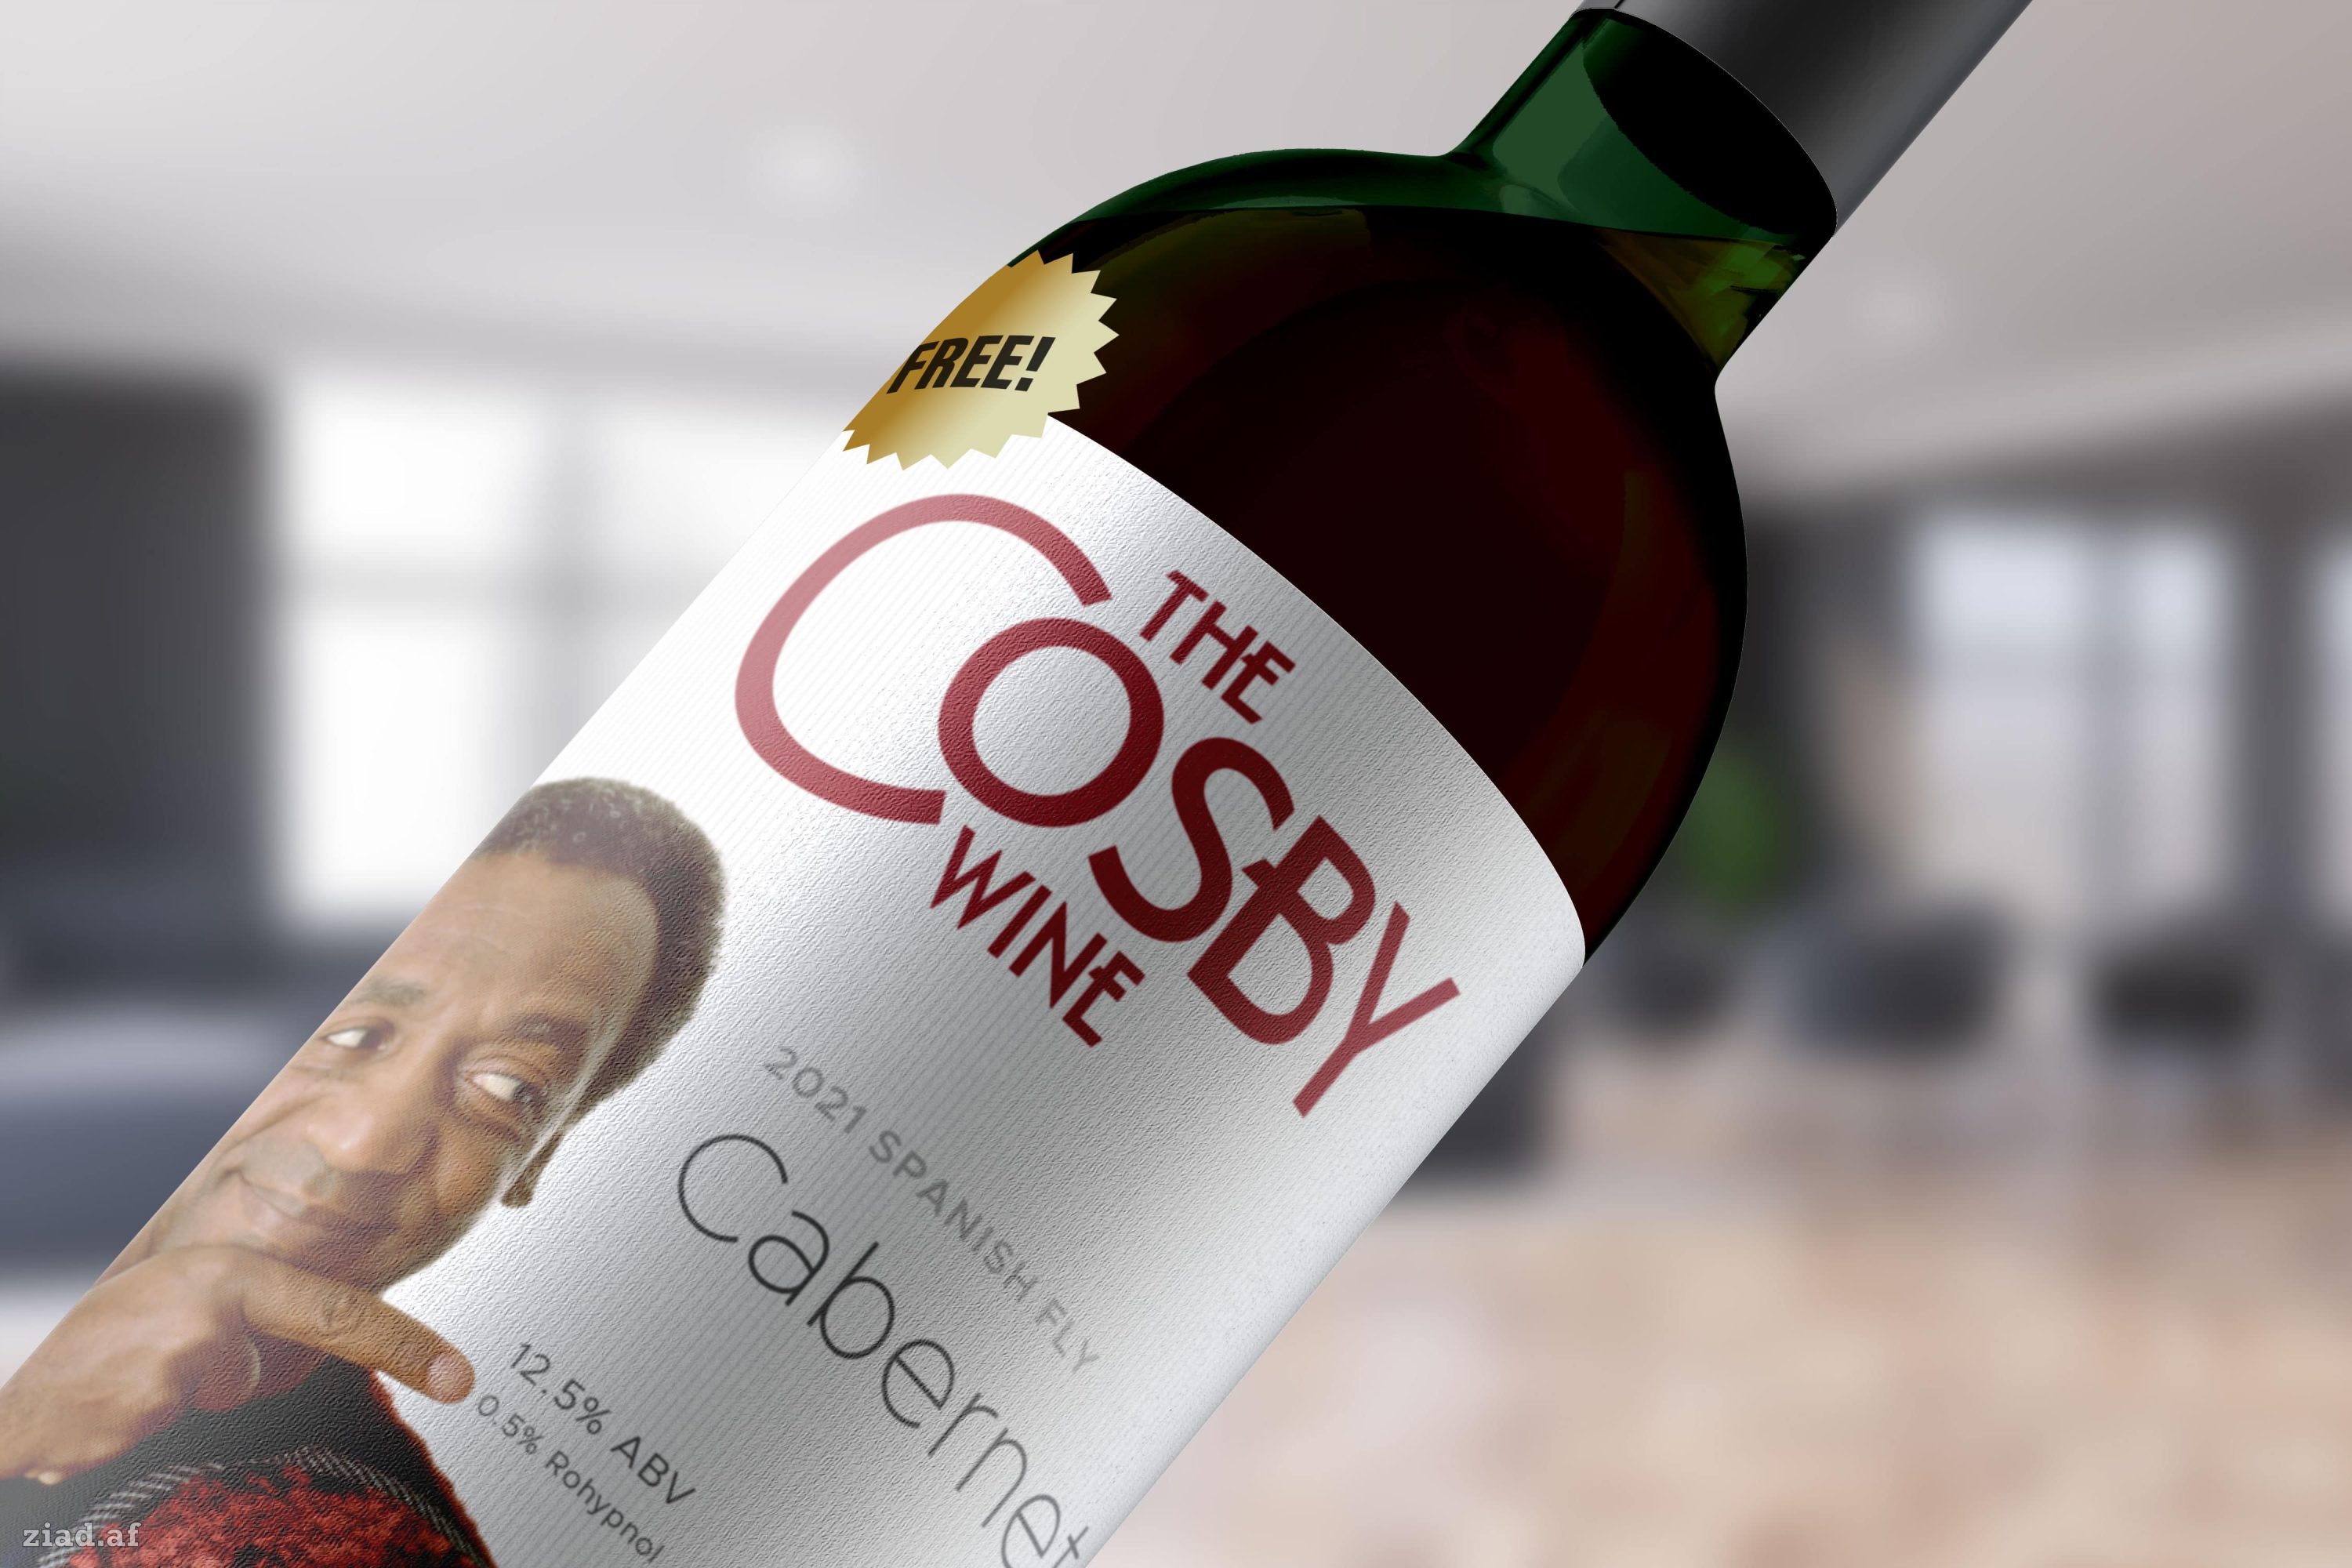 the-cosby-wine-v02